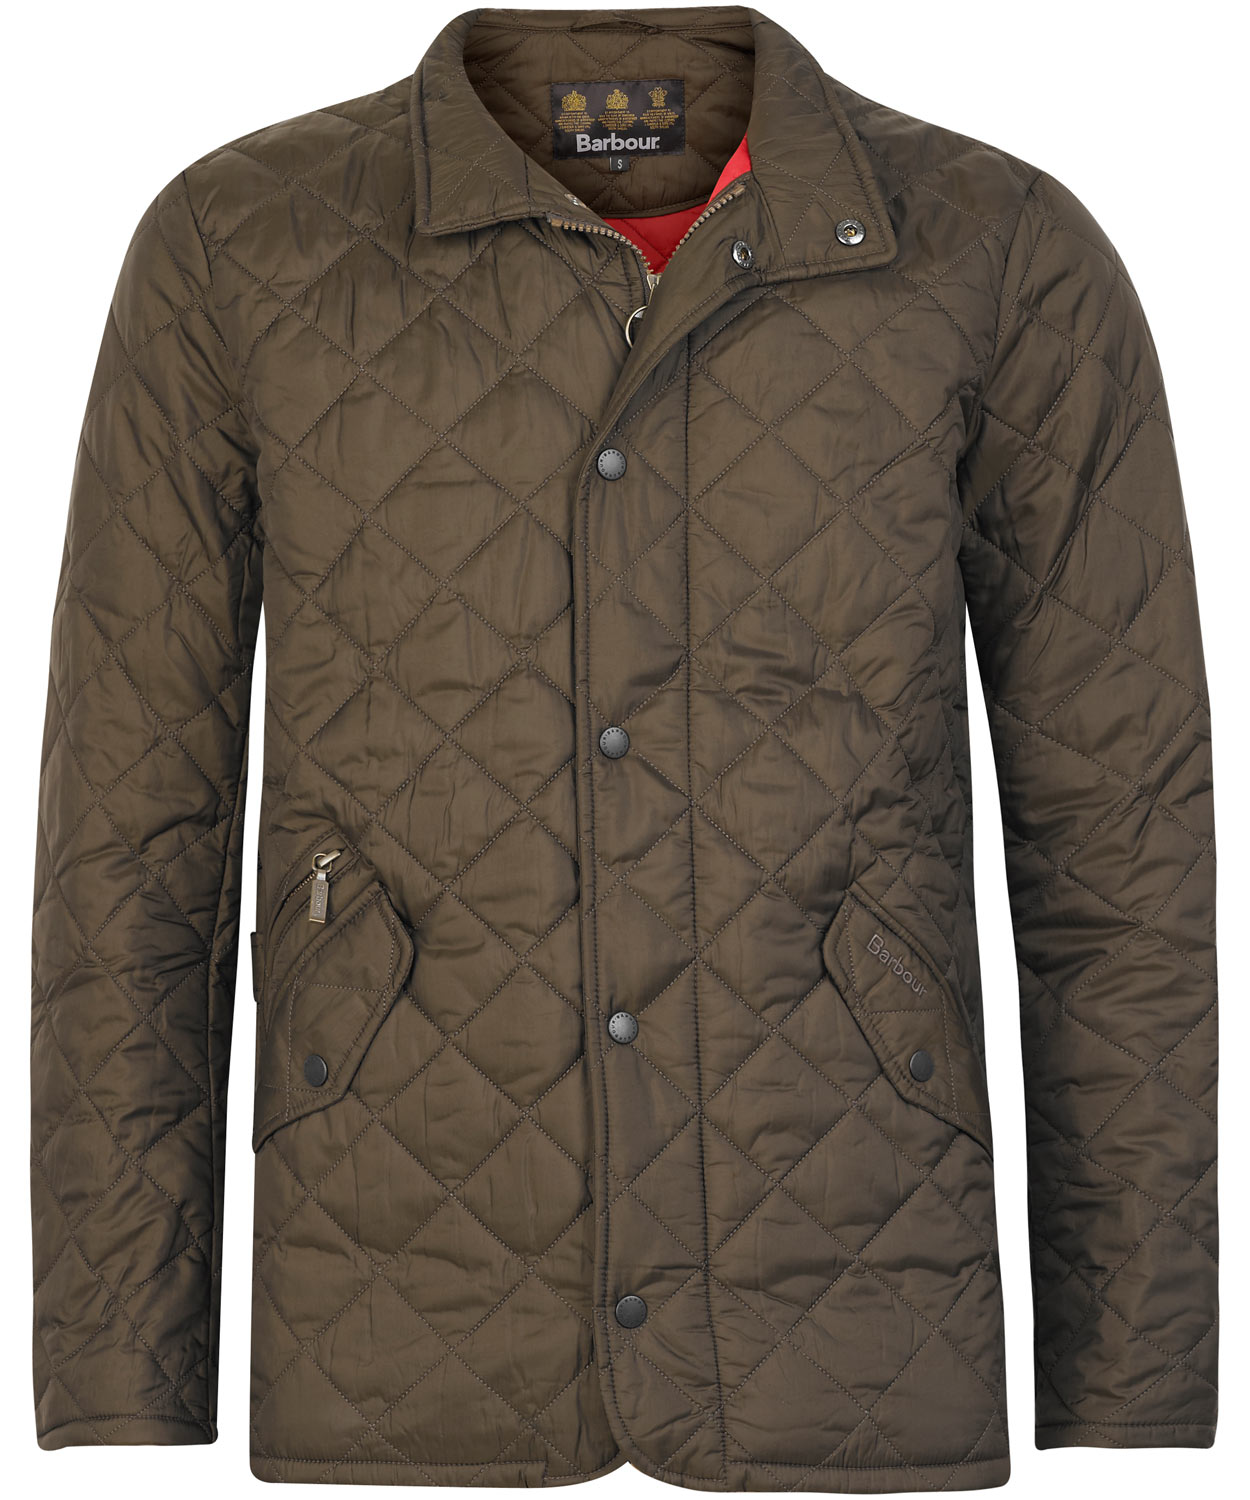 Lyst - Barbour Olive Flyweight Chelsea Quilted Jacket in Green for Men